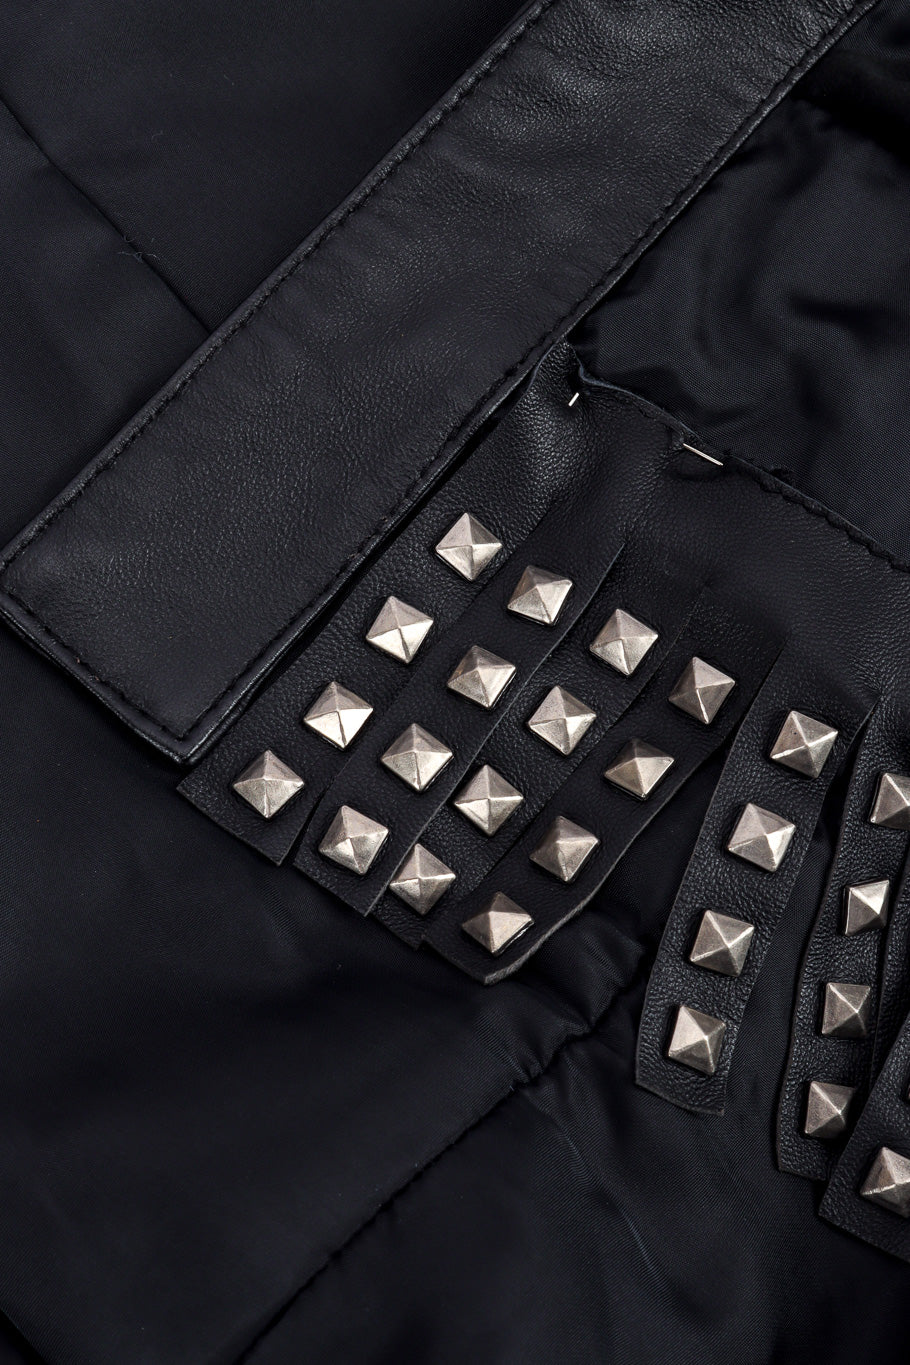 Class Roberto Cavalli Studded Leather Trench Coat split seam with safety pin closeup @recessla